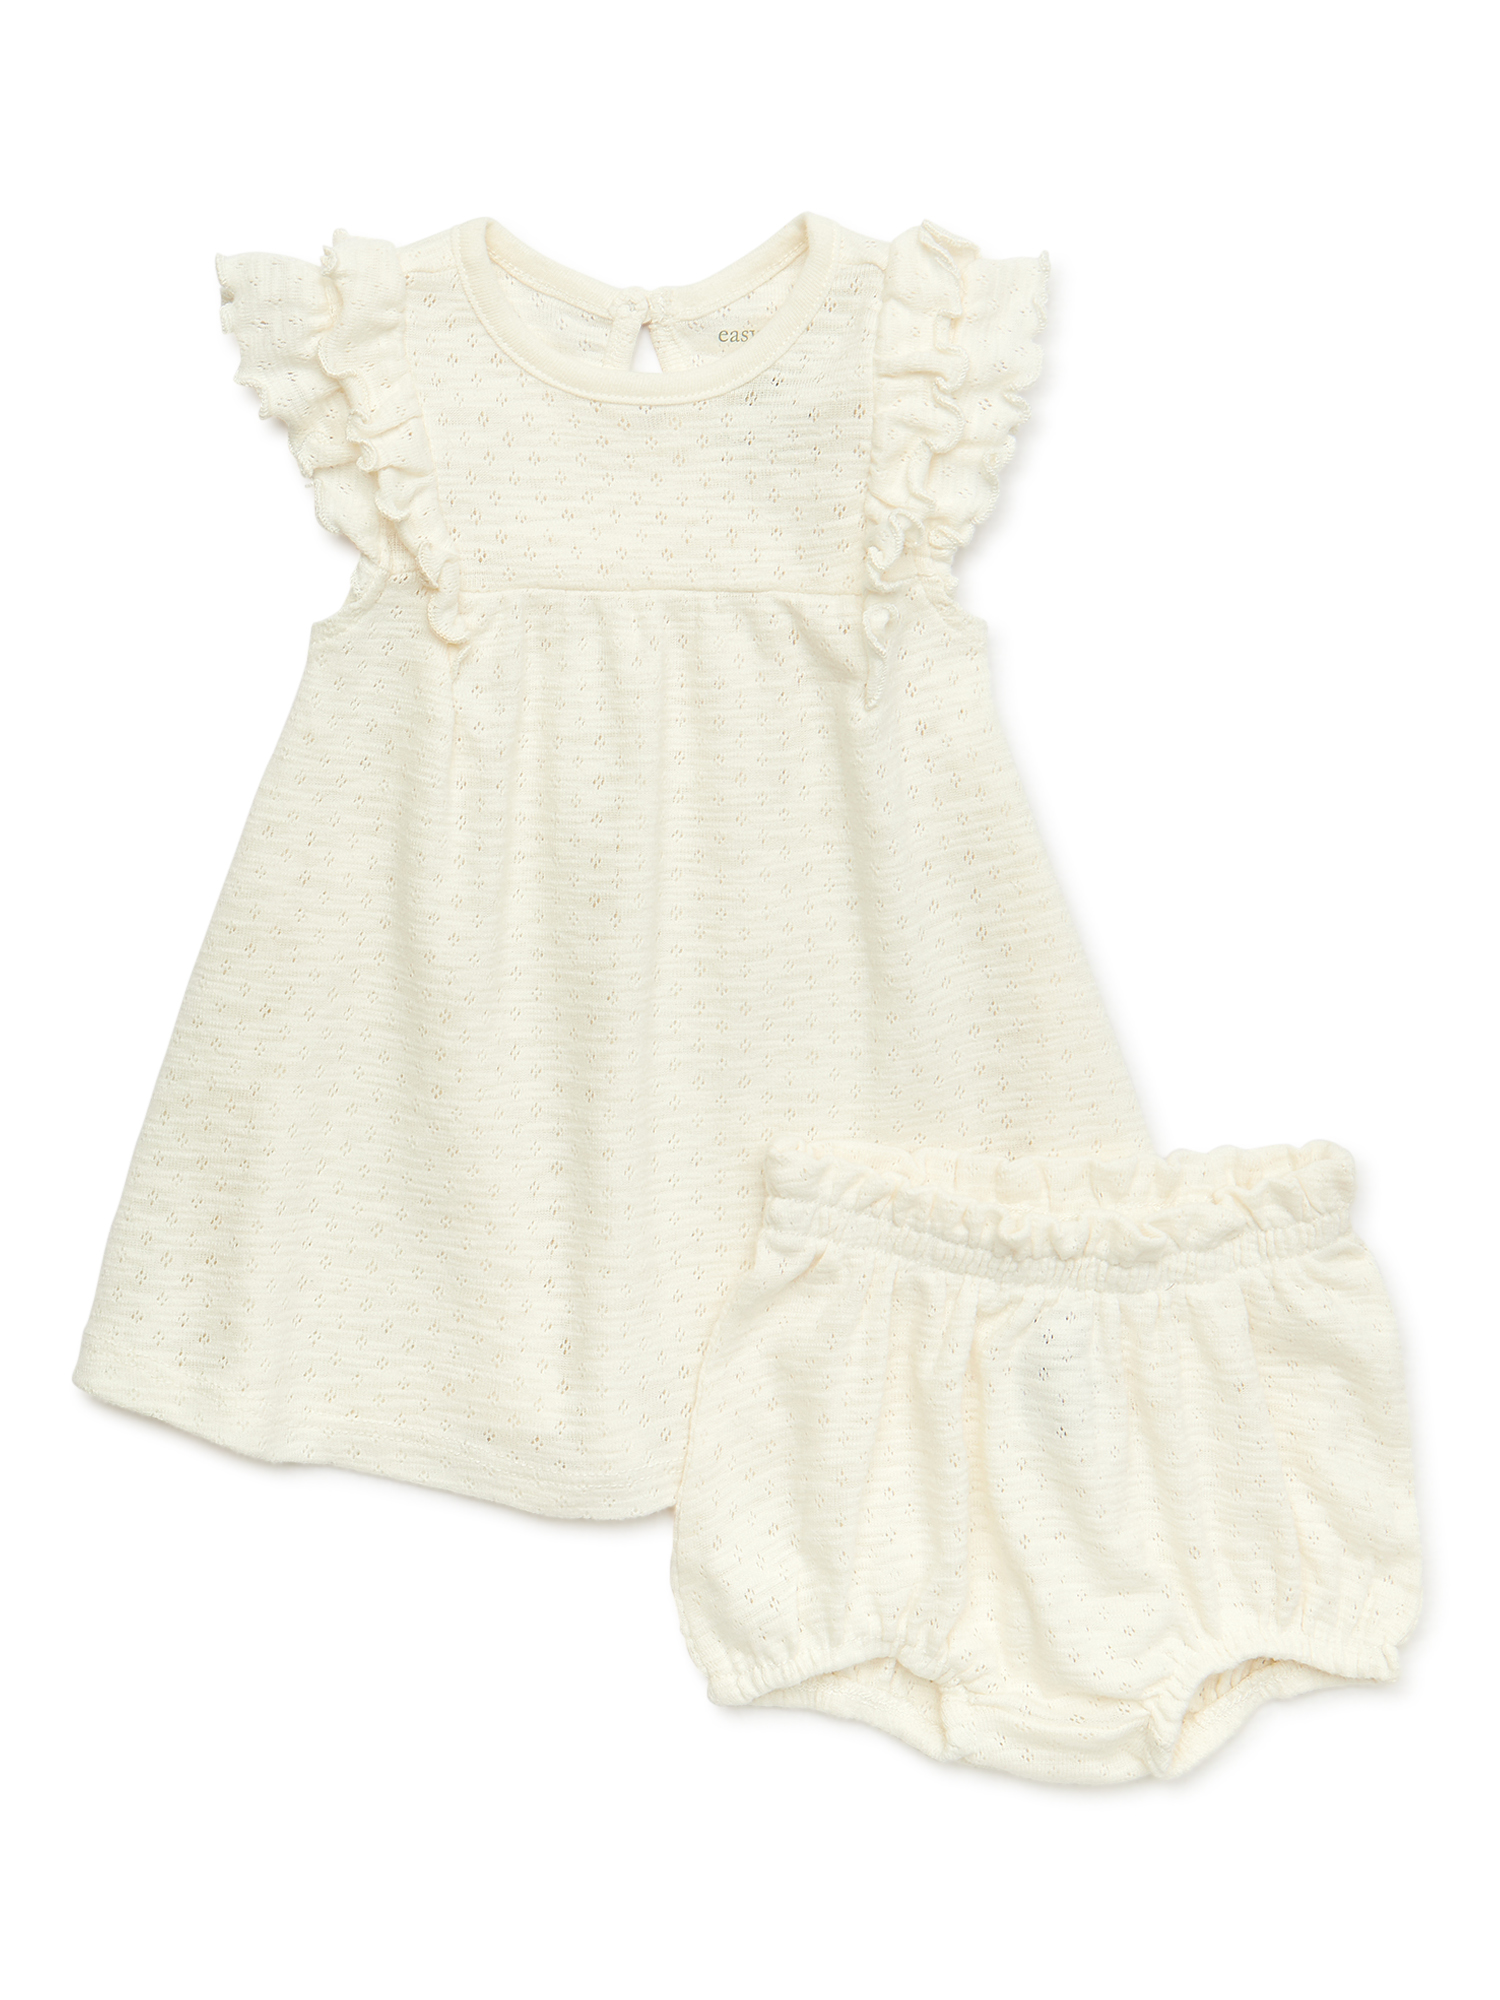 easy-peasy Baby Girl Ruffled Pointelle Dress with Diaper Cover, Sizes 0/3M-24M - image 1 of 6